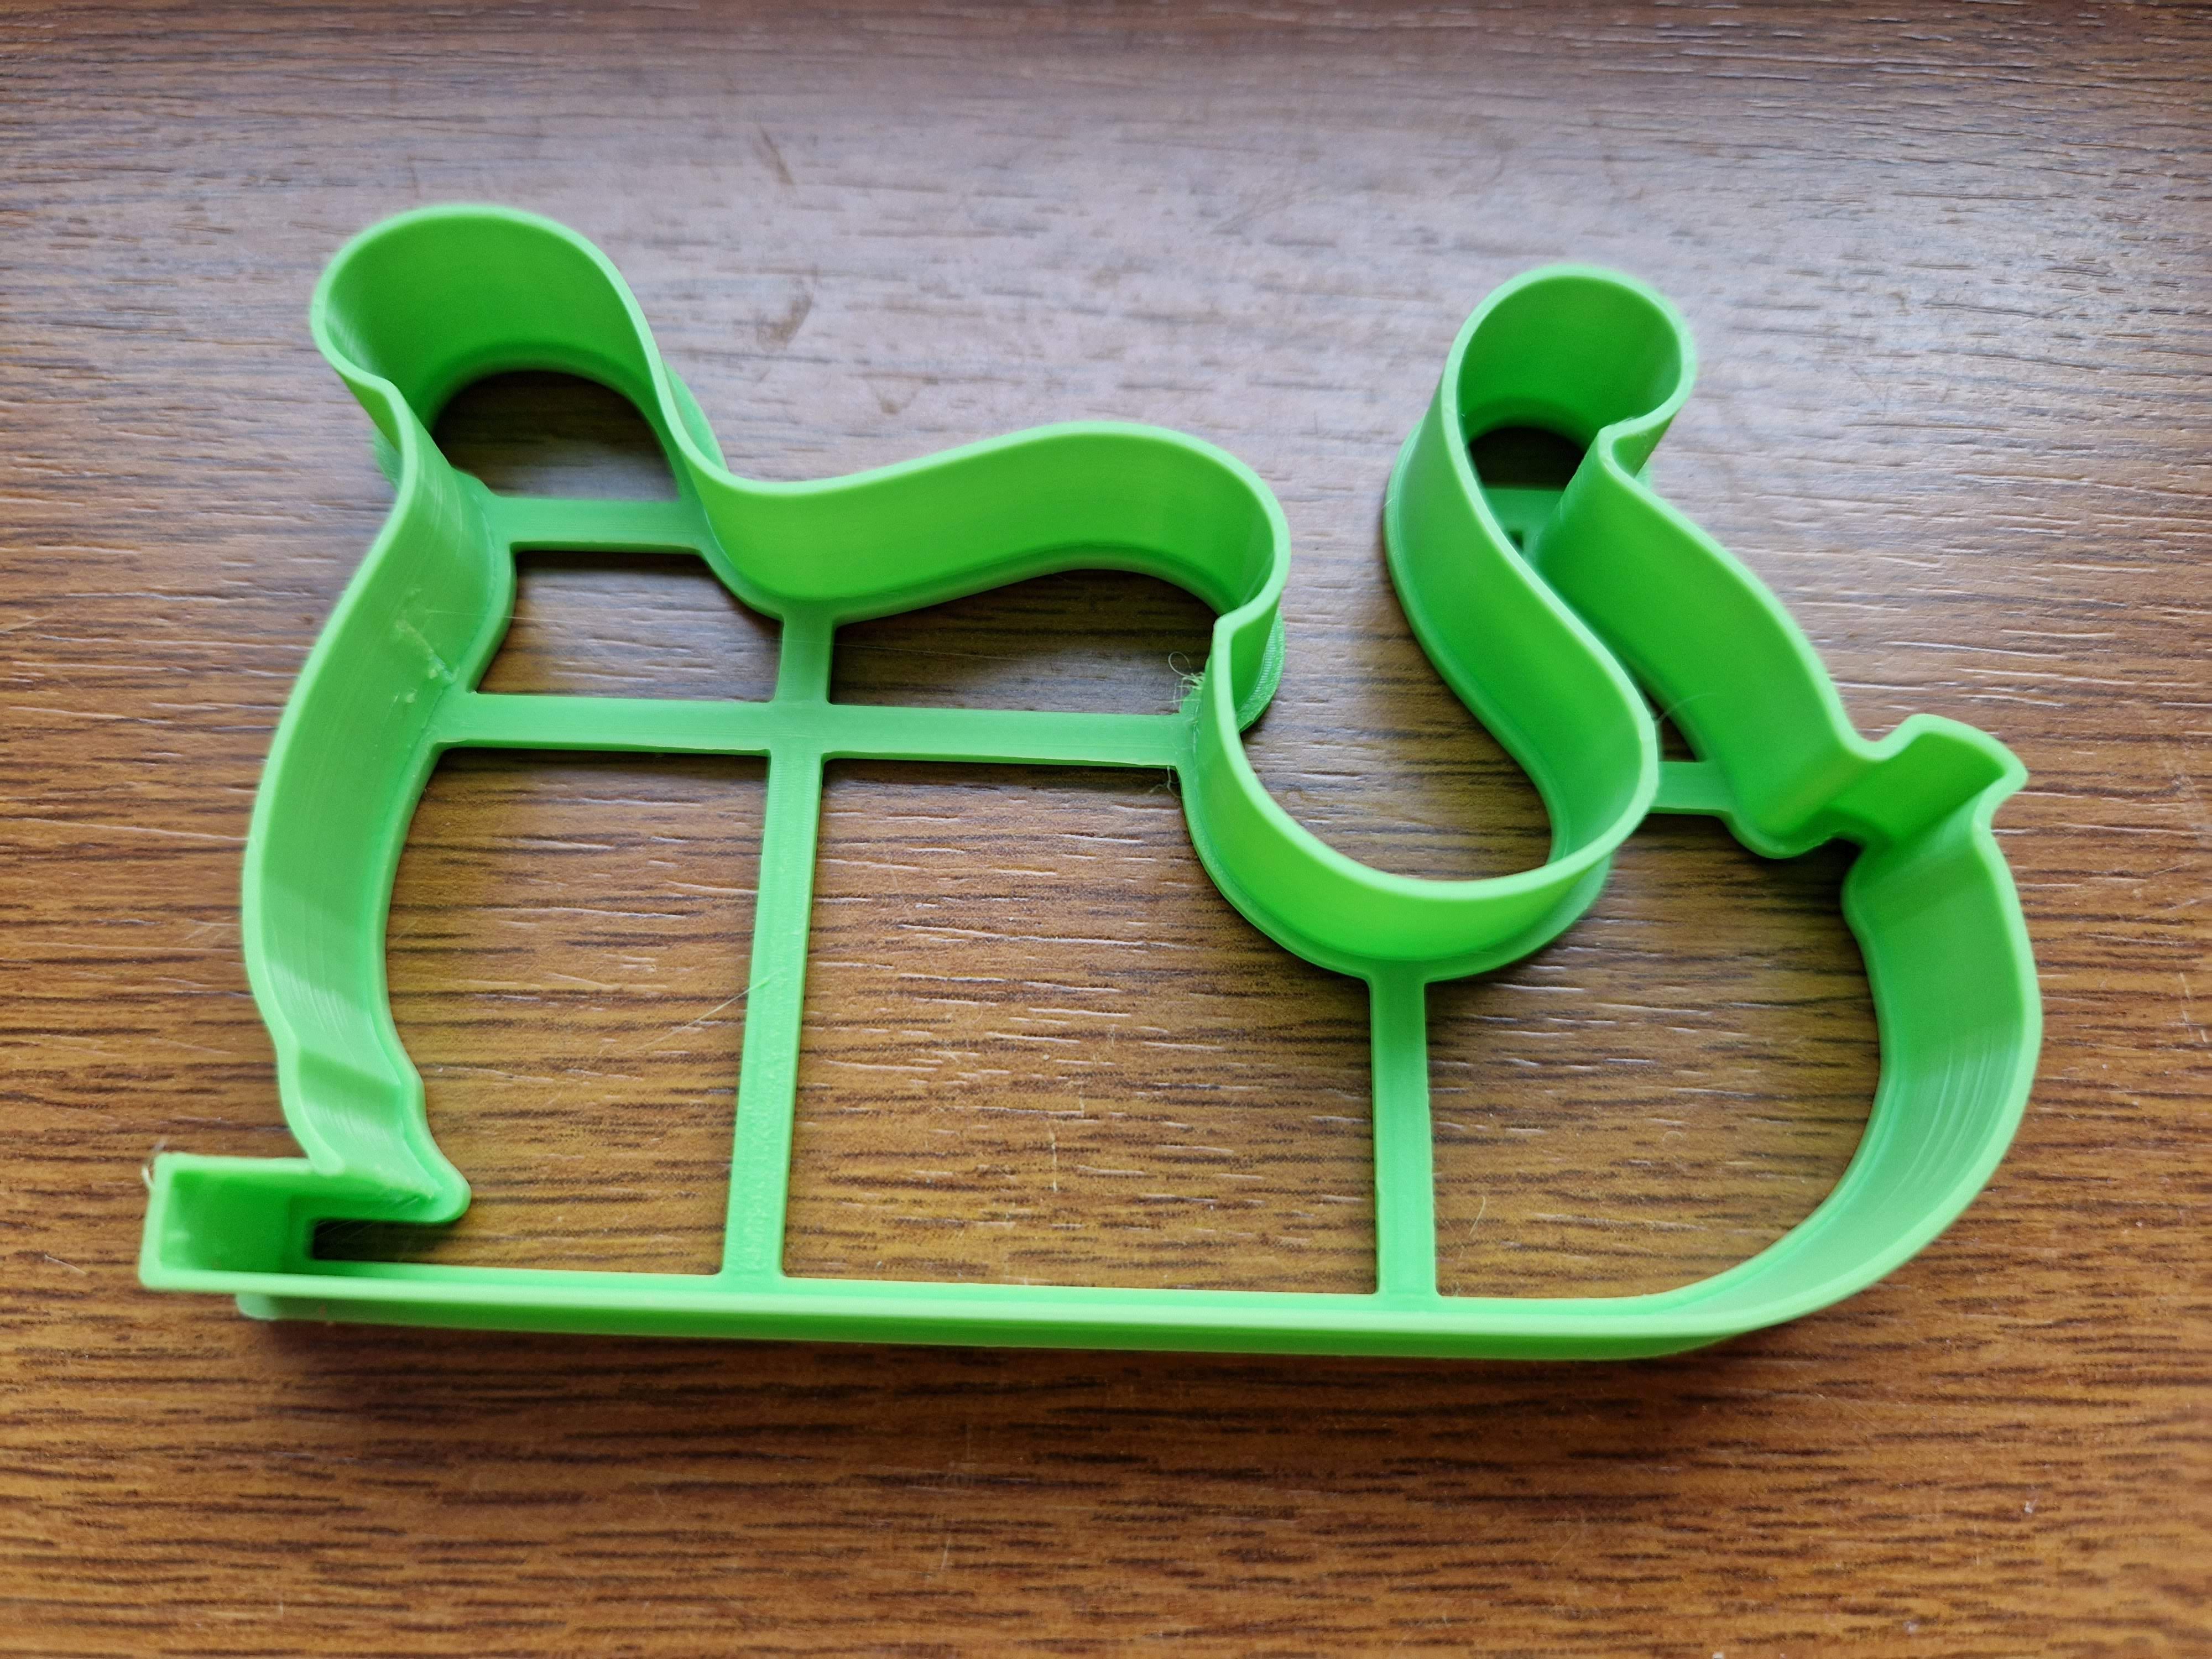 Cookie cutter in the shape of a Santa Claus sled